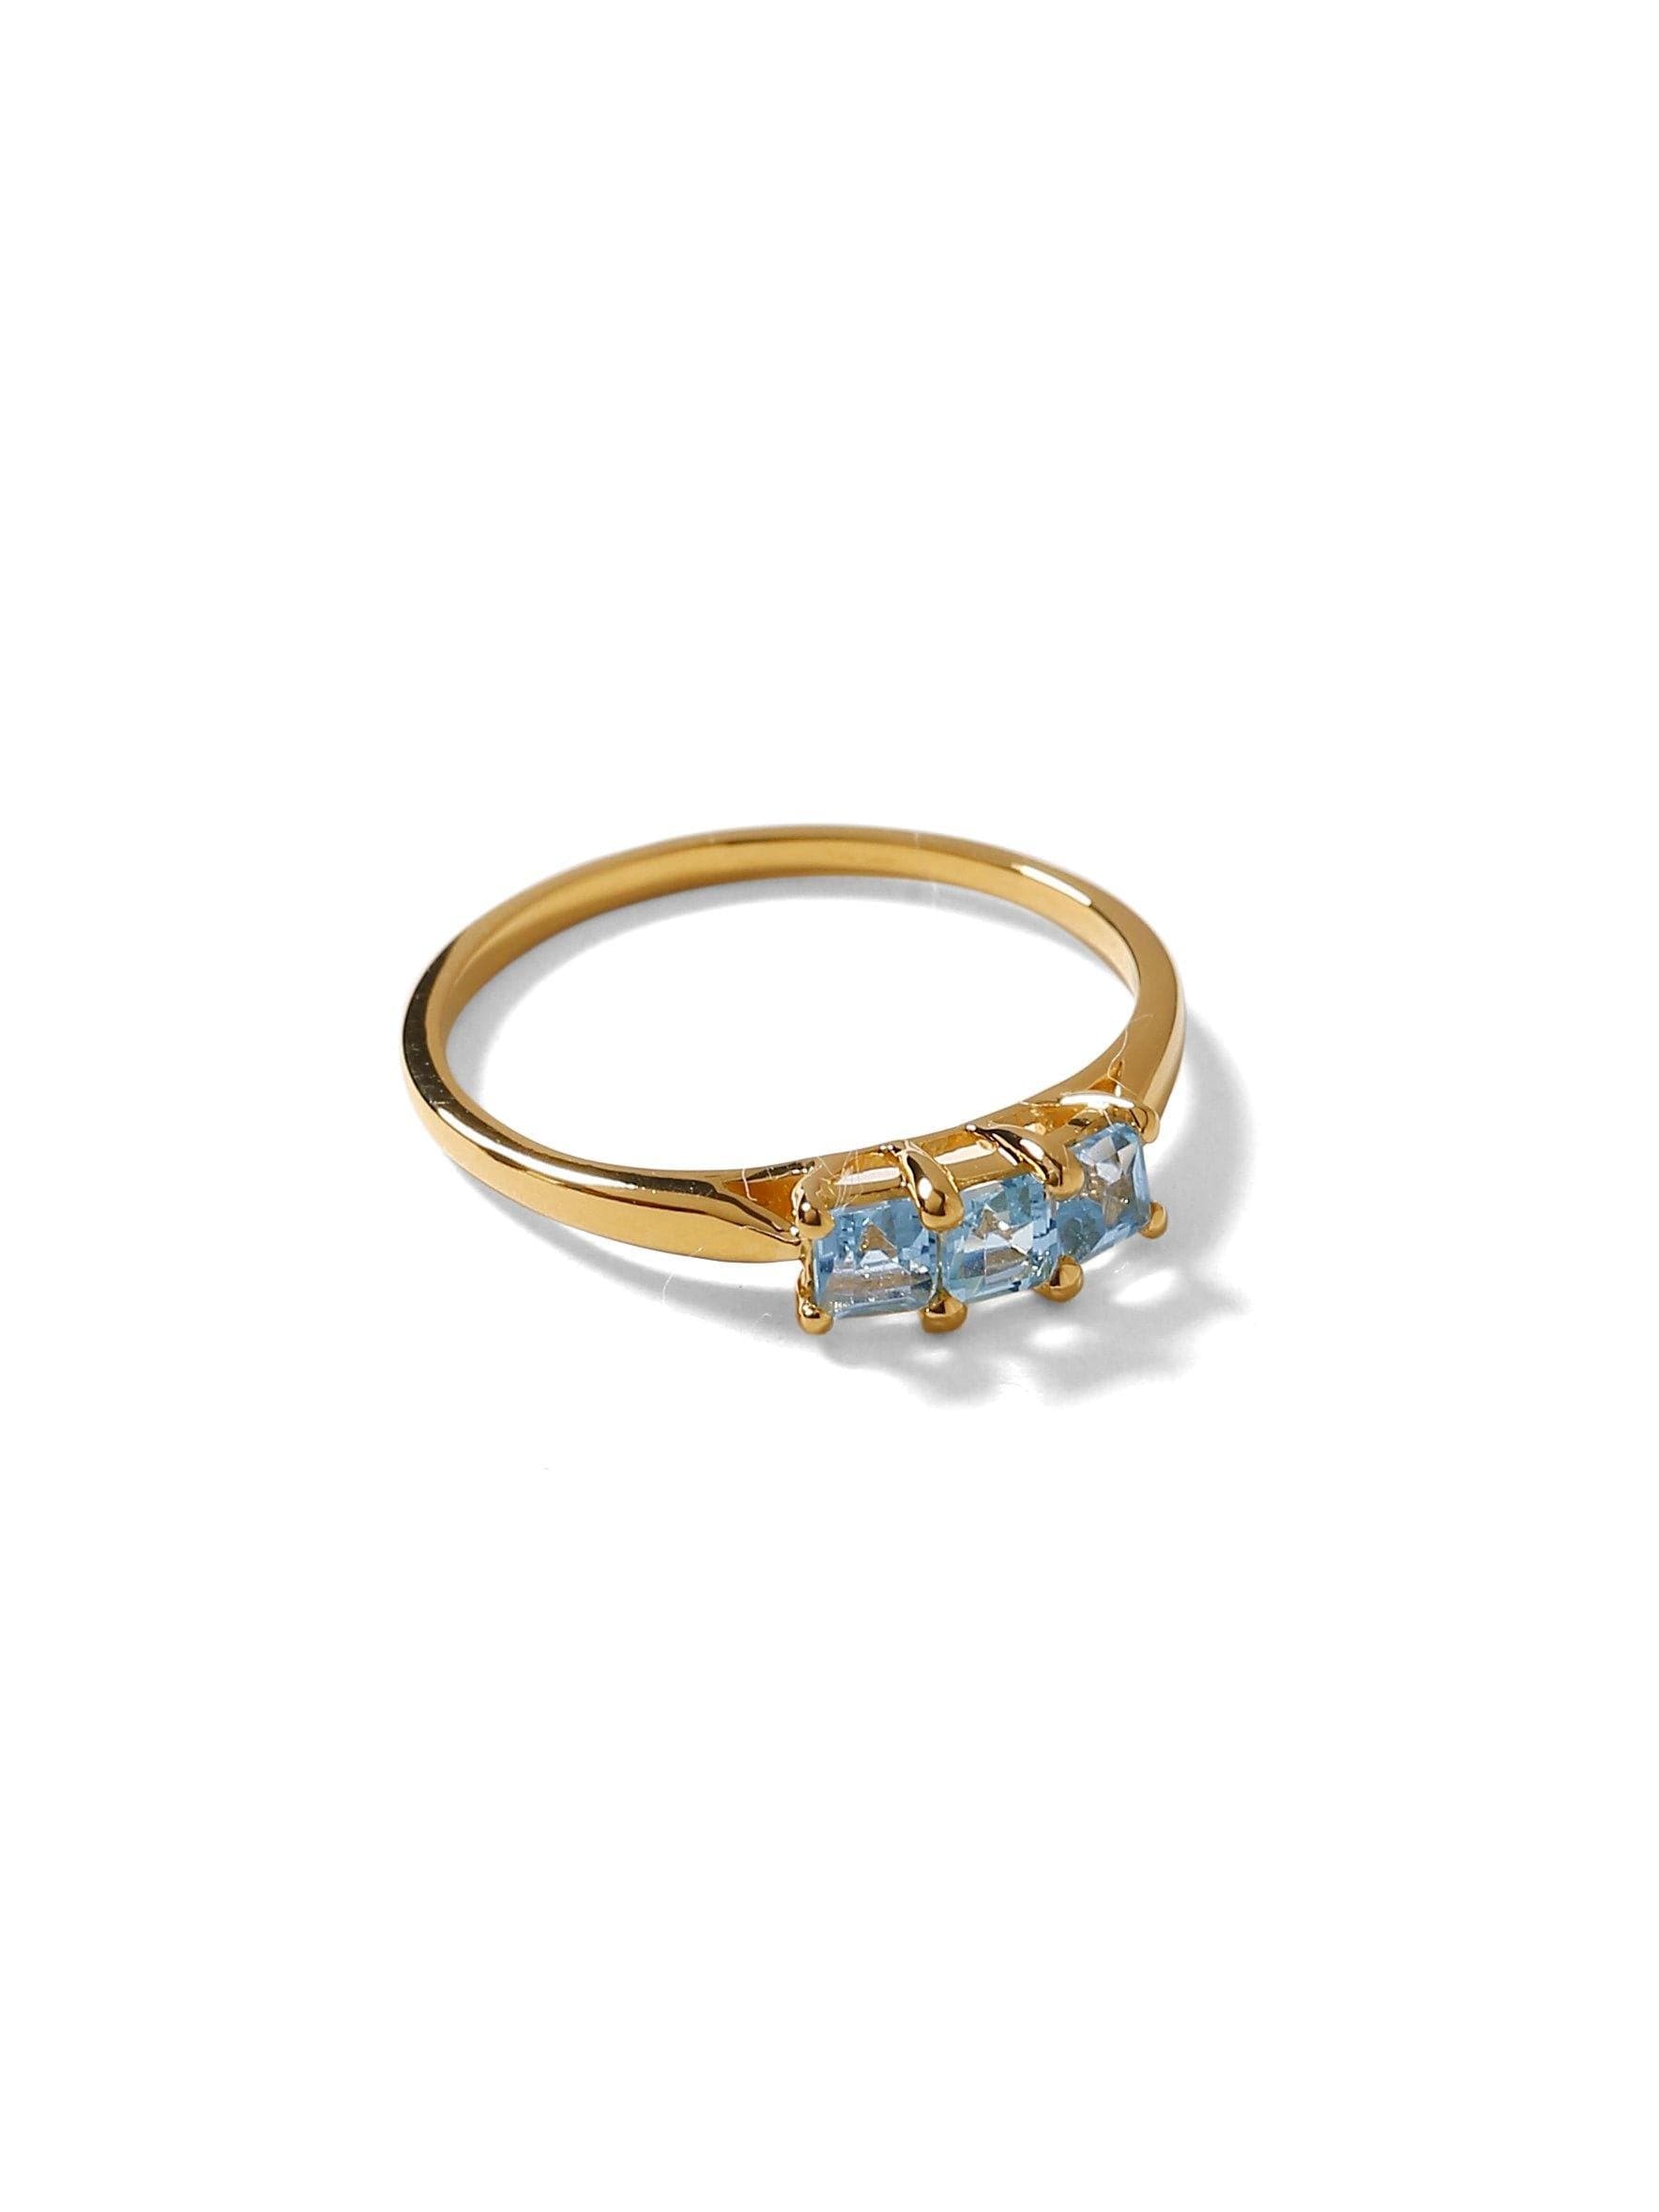 0.60 Ct. Sky Blue Topaz Solid 10k Yellow Gold Band Ring Jewelry - YoTreasure